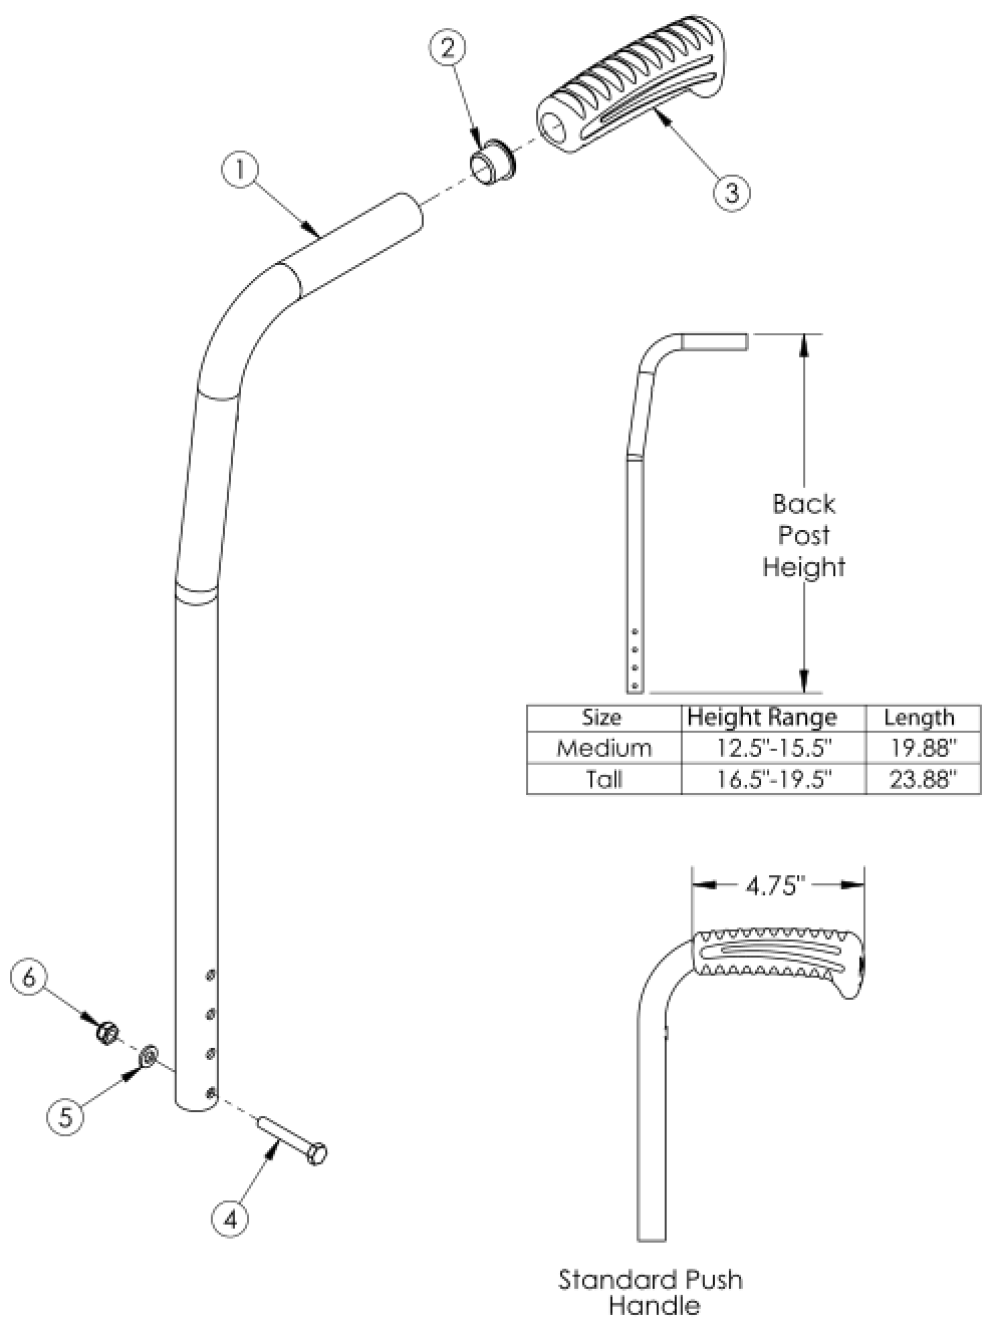 Catalyst 4 Standard Back Post (8° Bend With Push Handle) parts diagram